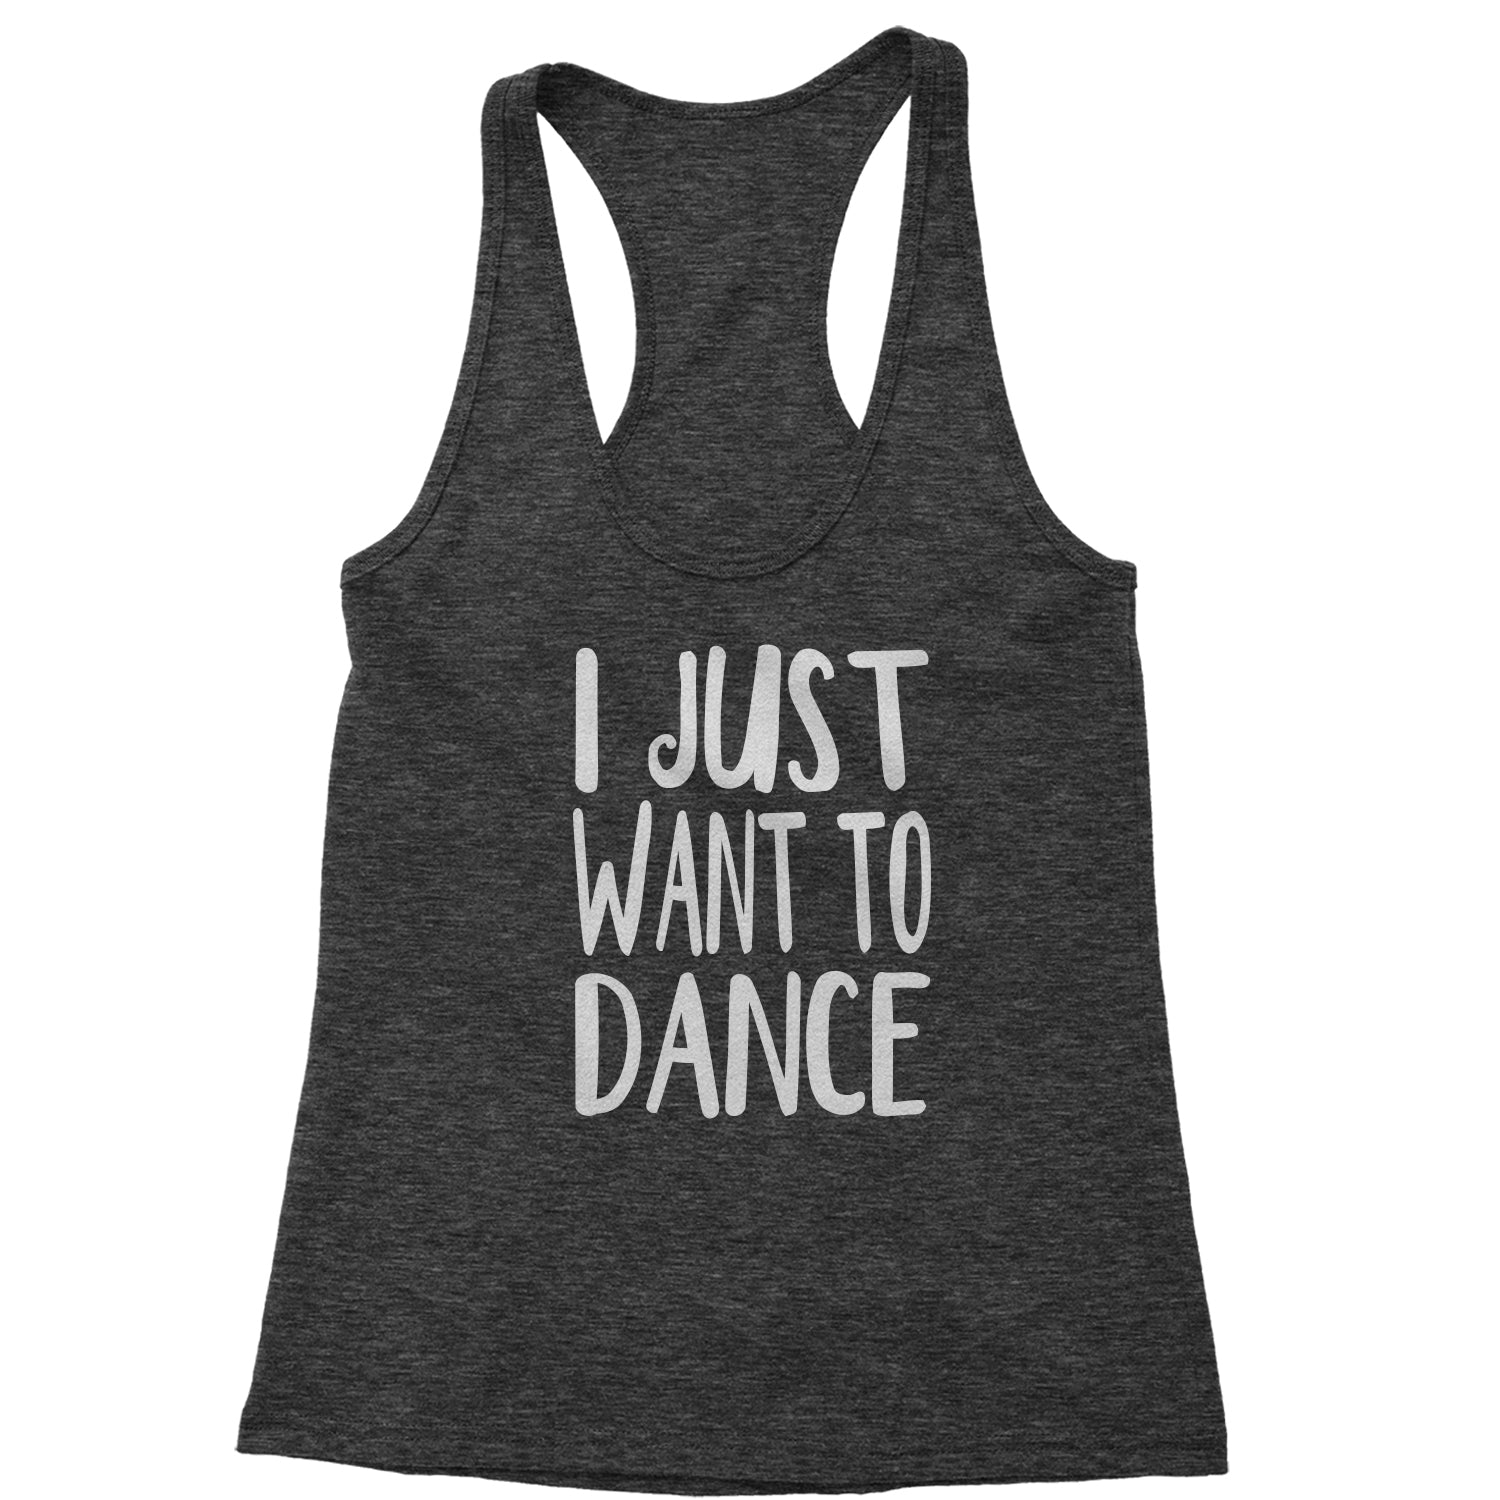 I Just Want To Dance Racerback Tank Top for Women boomerang, dancing, jo, jojo by Expression Tees